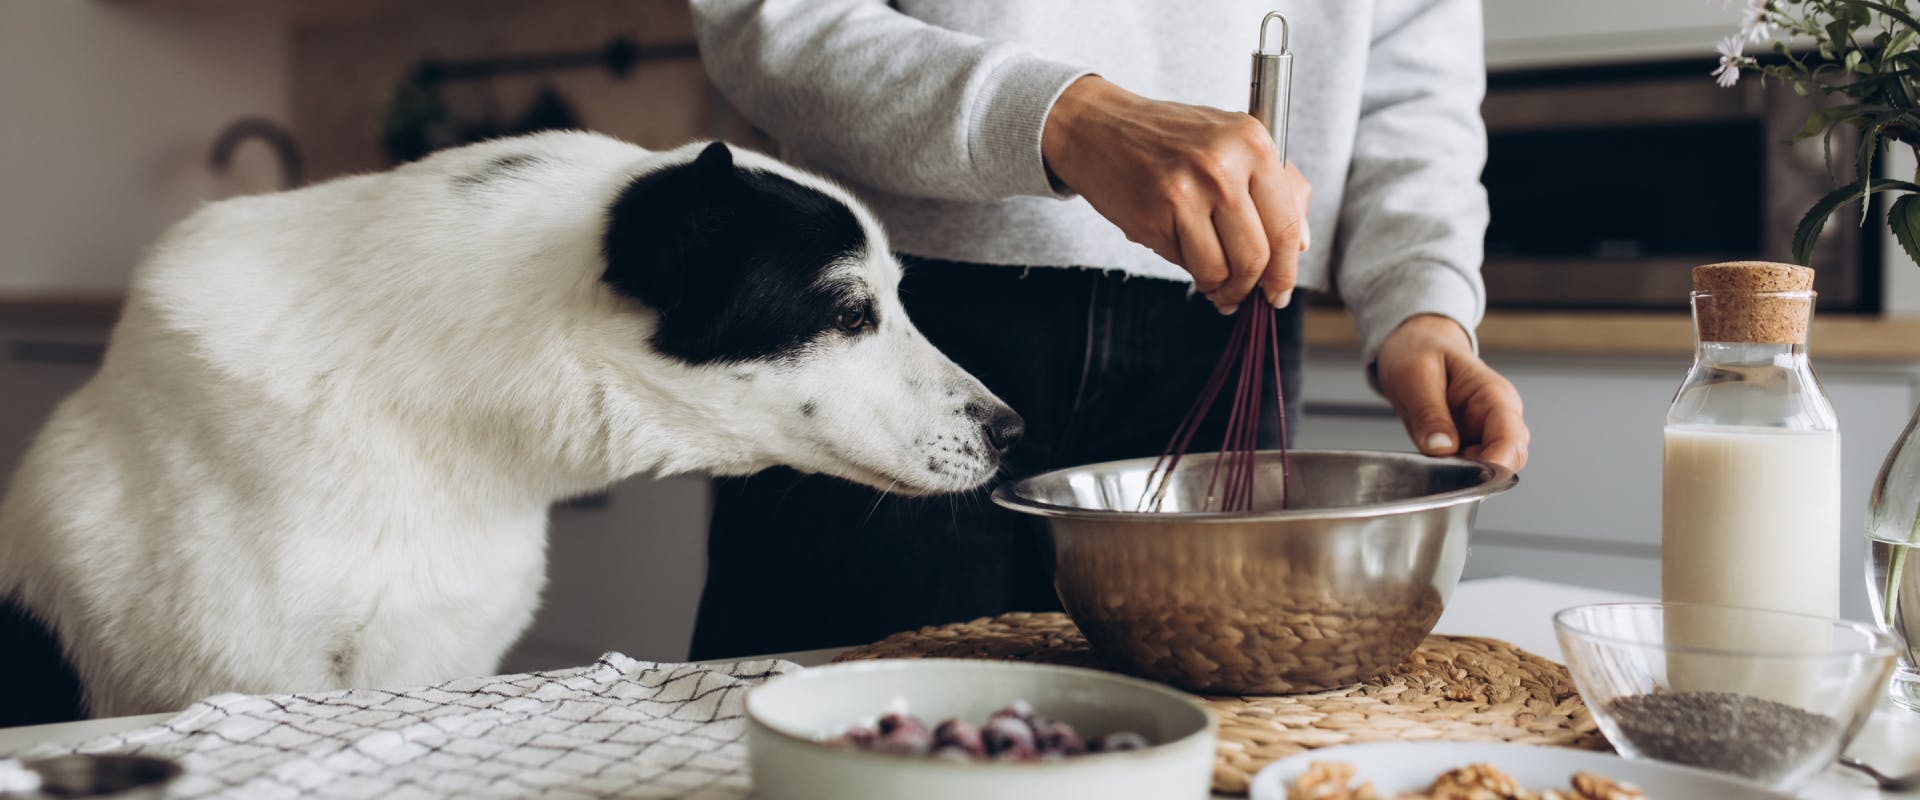 a white and black dog sniffing a a mixing bowl a human is using a whisk to stir the contents